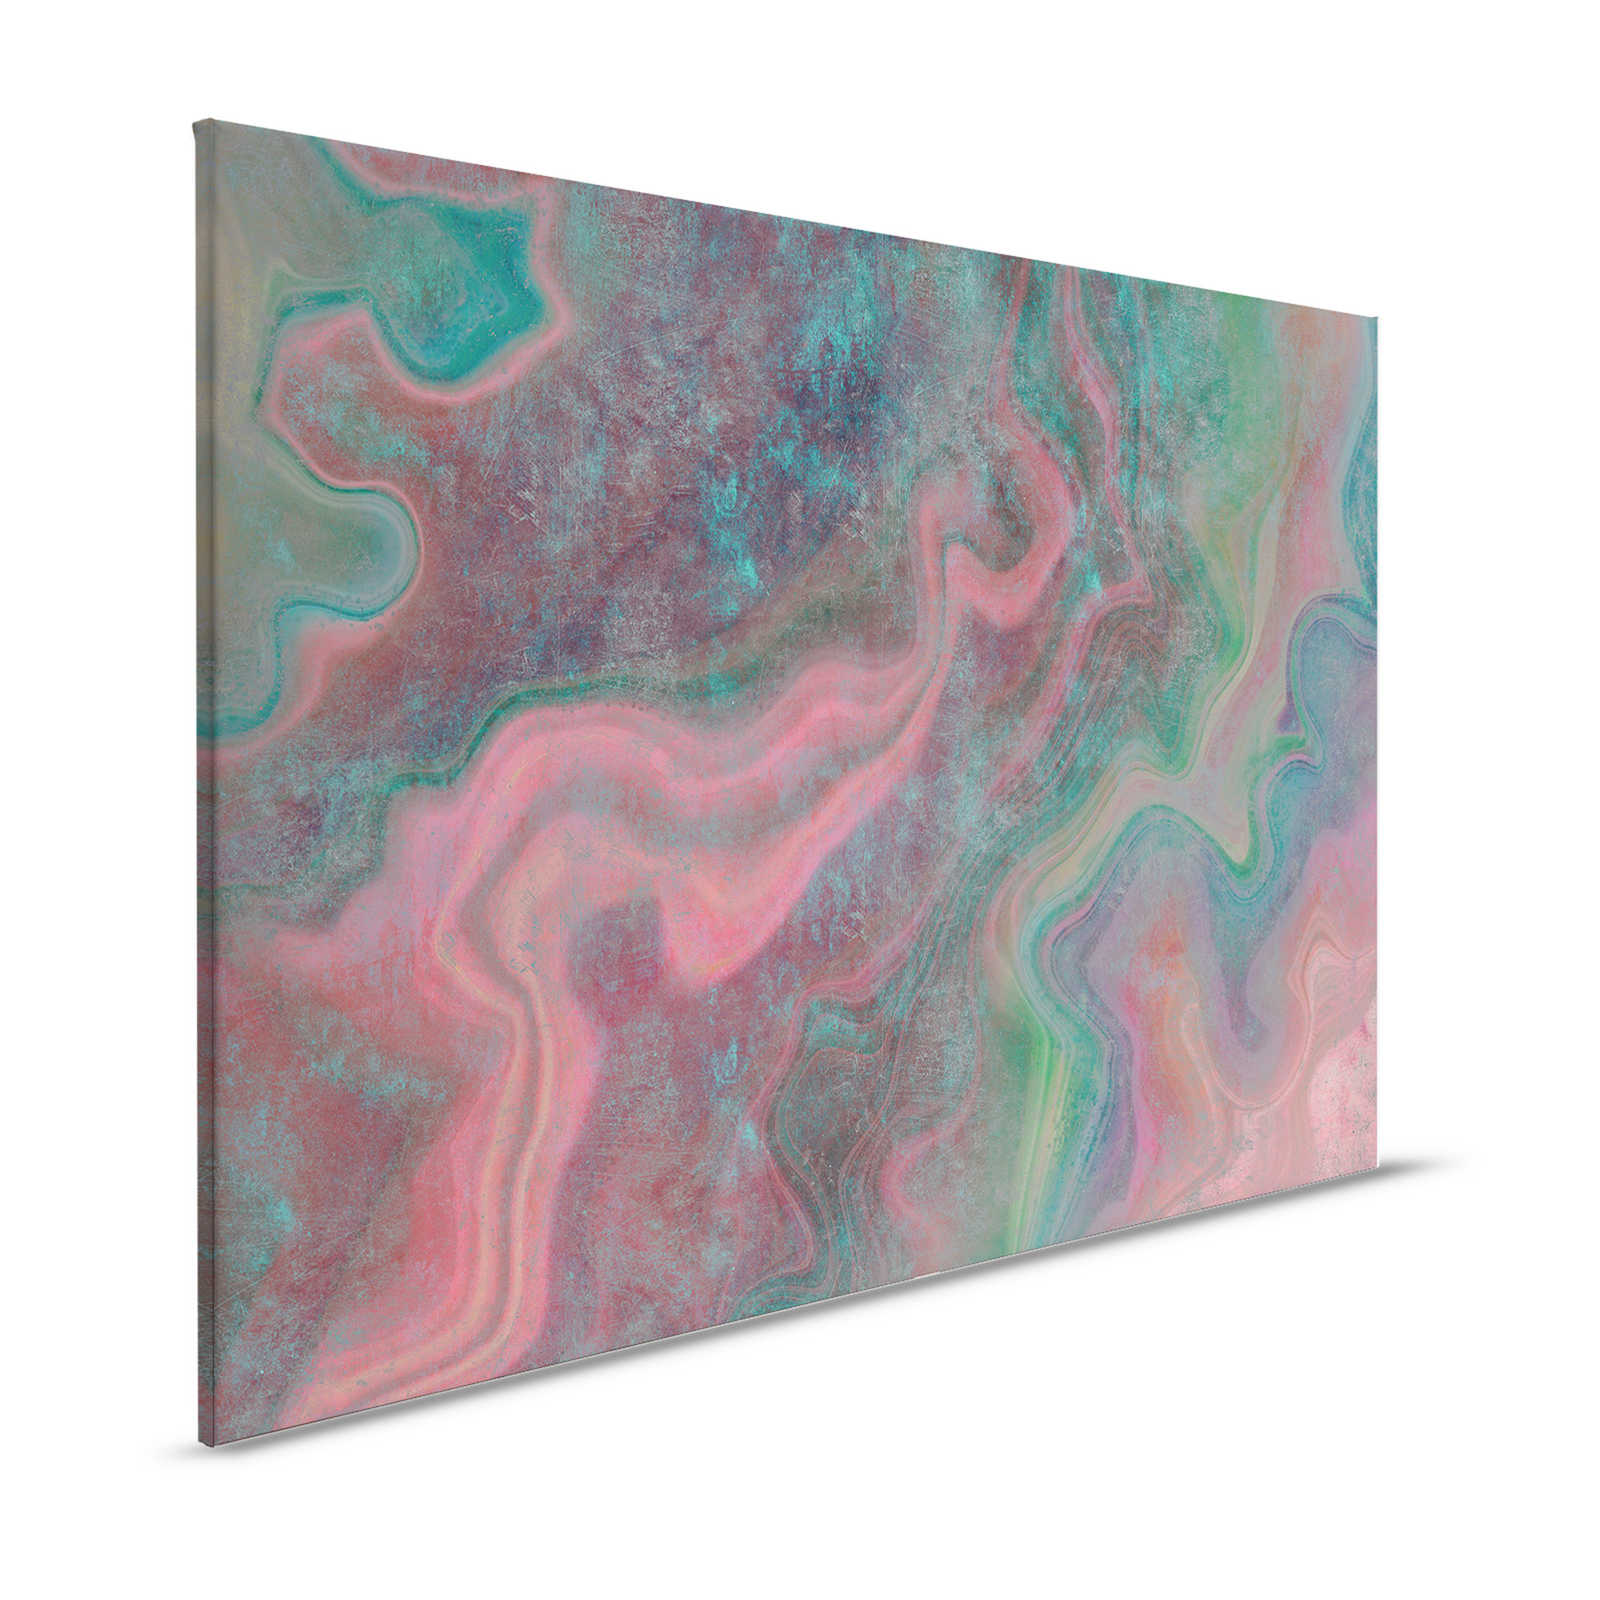 Marble 1 - Colourful marble as a highlight canvas picture with scratch structure - 1.20 m x 0.80 m
